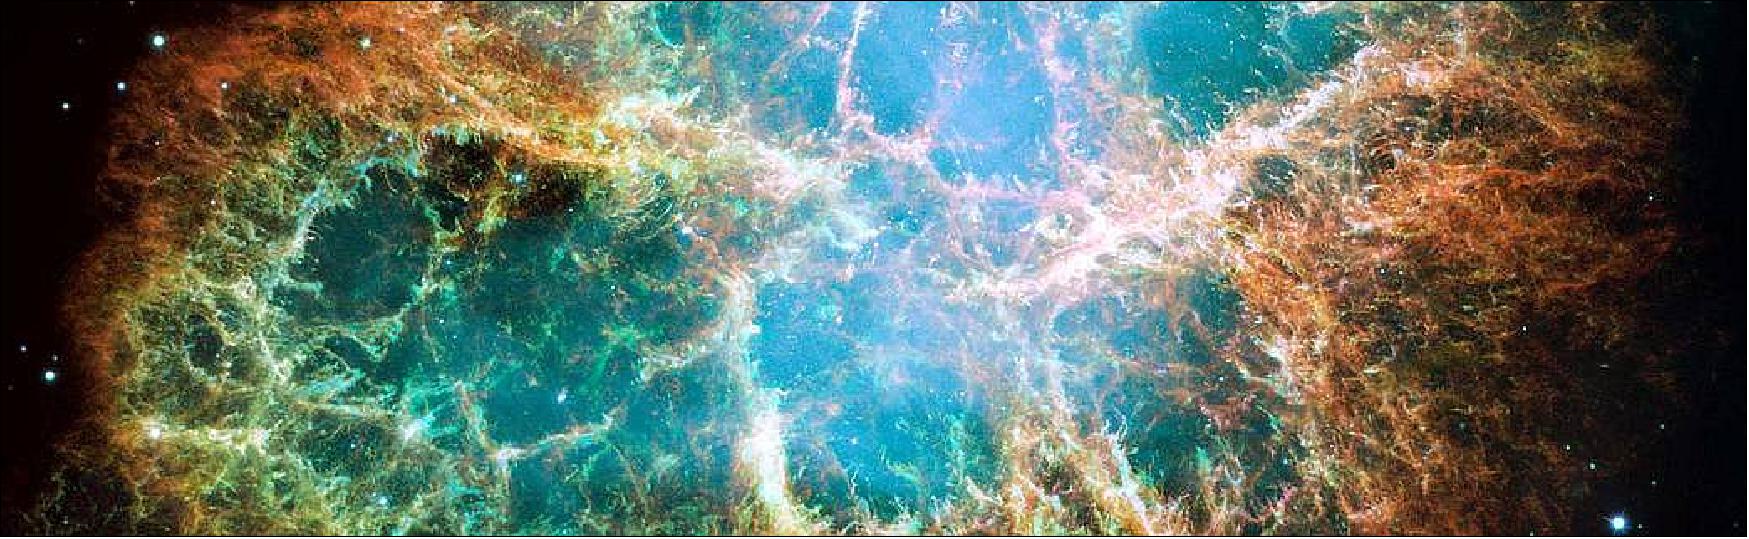 Figure 17: The Crab Nebula, the six-light-year-wide expanding cloud of debris from a supernova explosion, hosts a neutron star spinning 30 times a second that is among the brightest pulsars in the sky at X-ray and radio wavelengths. This composite of Hubble Space Telescope images reveals different gases expelled in the explosion: blue reveals neutral oxygen, green shows singly ionized sulfur, and red indicates doubly ionized oxygen [image credits: NASA, ESA, J. Hester and A. Loll (Arizona State University)]